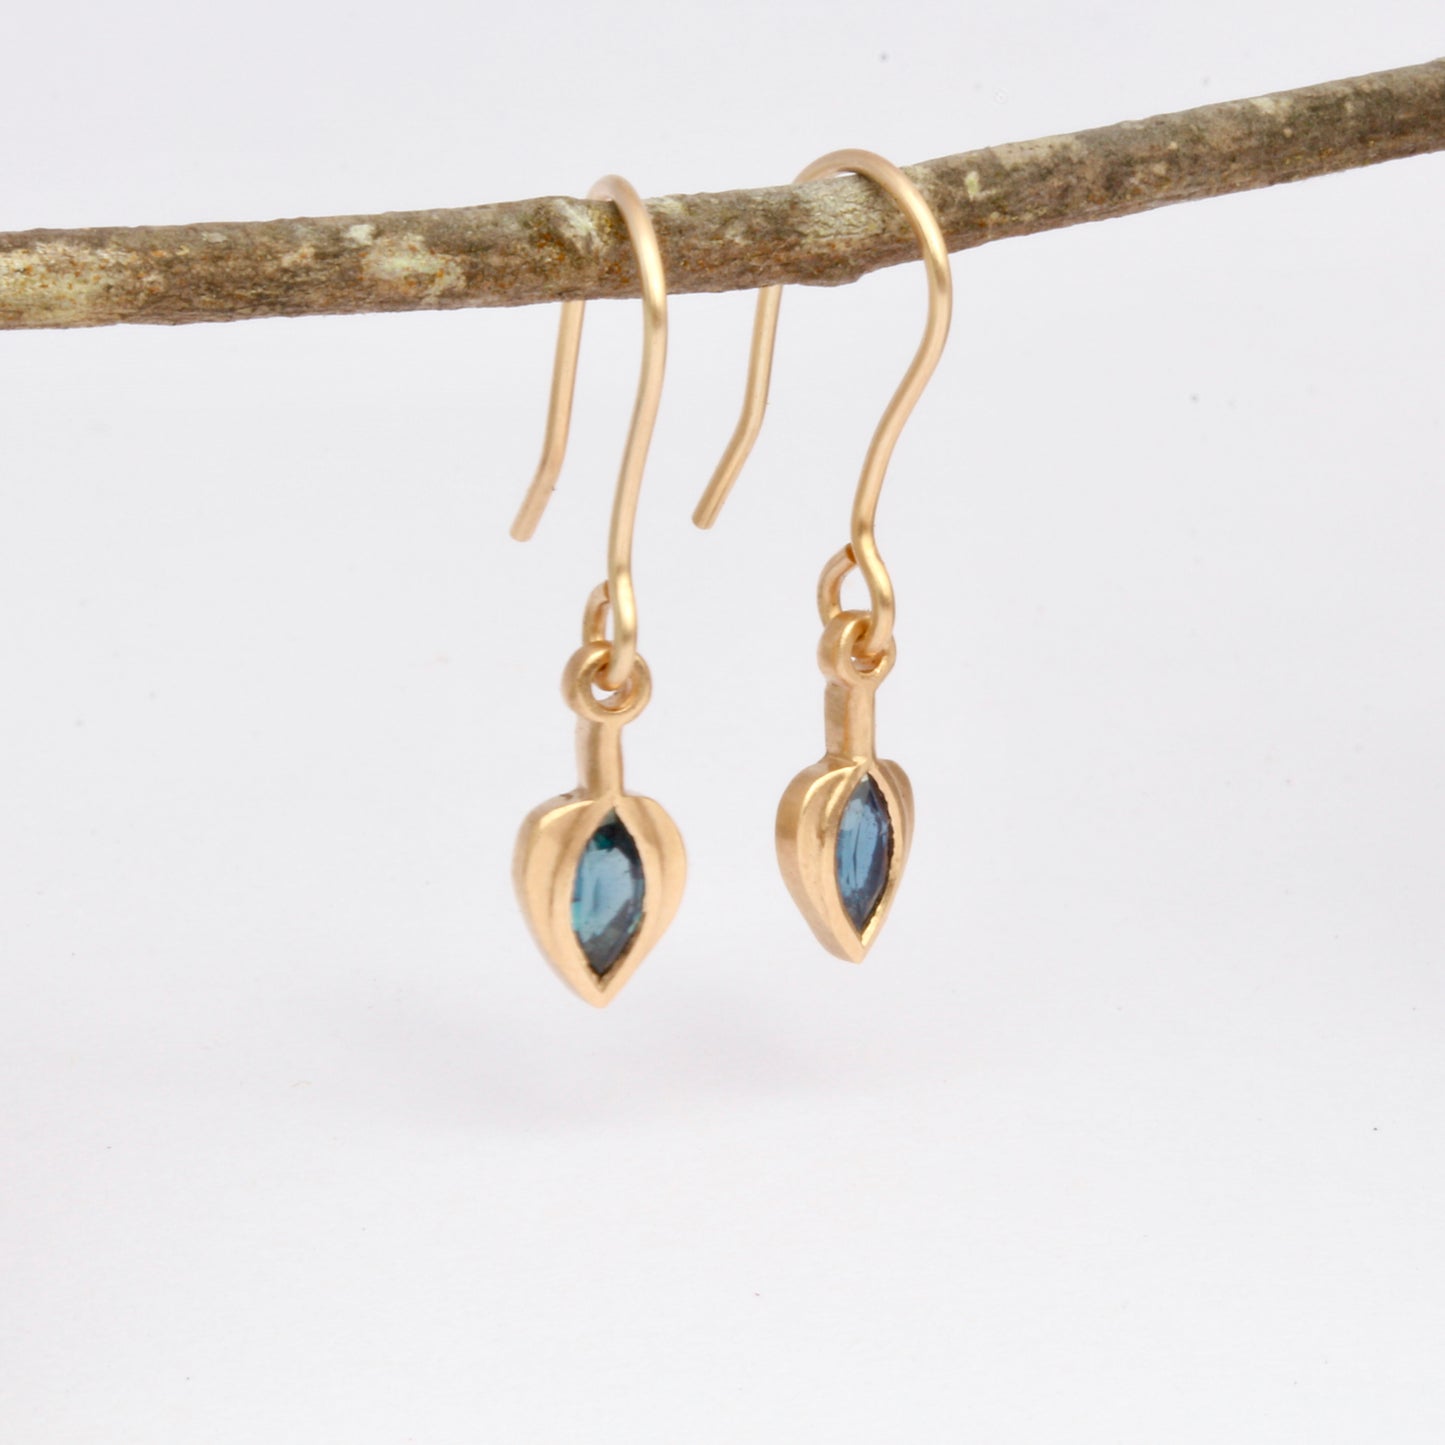 Teal sapphire and solid gold drop earrings